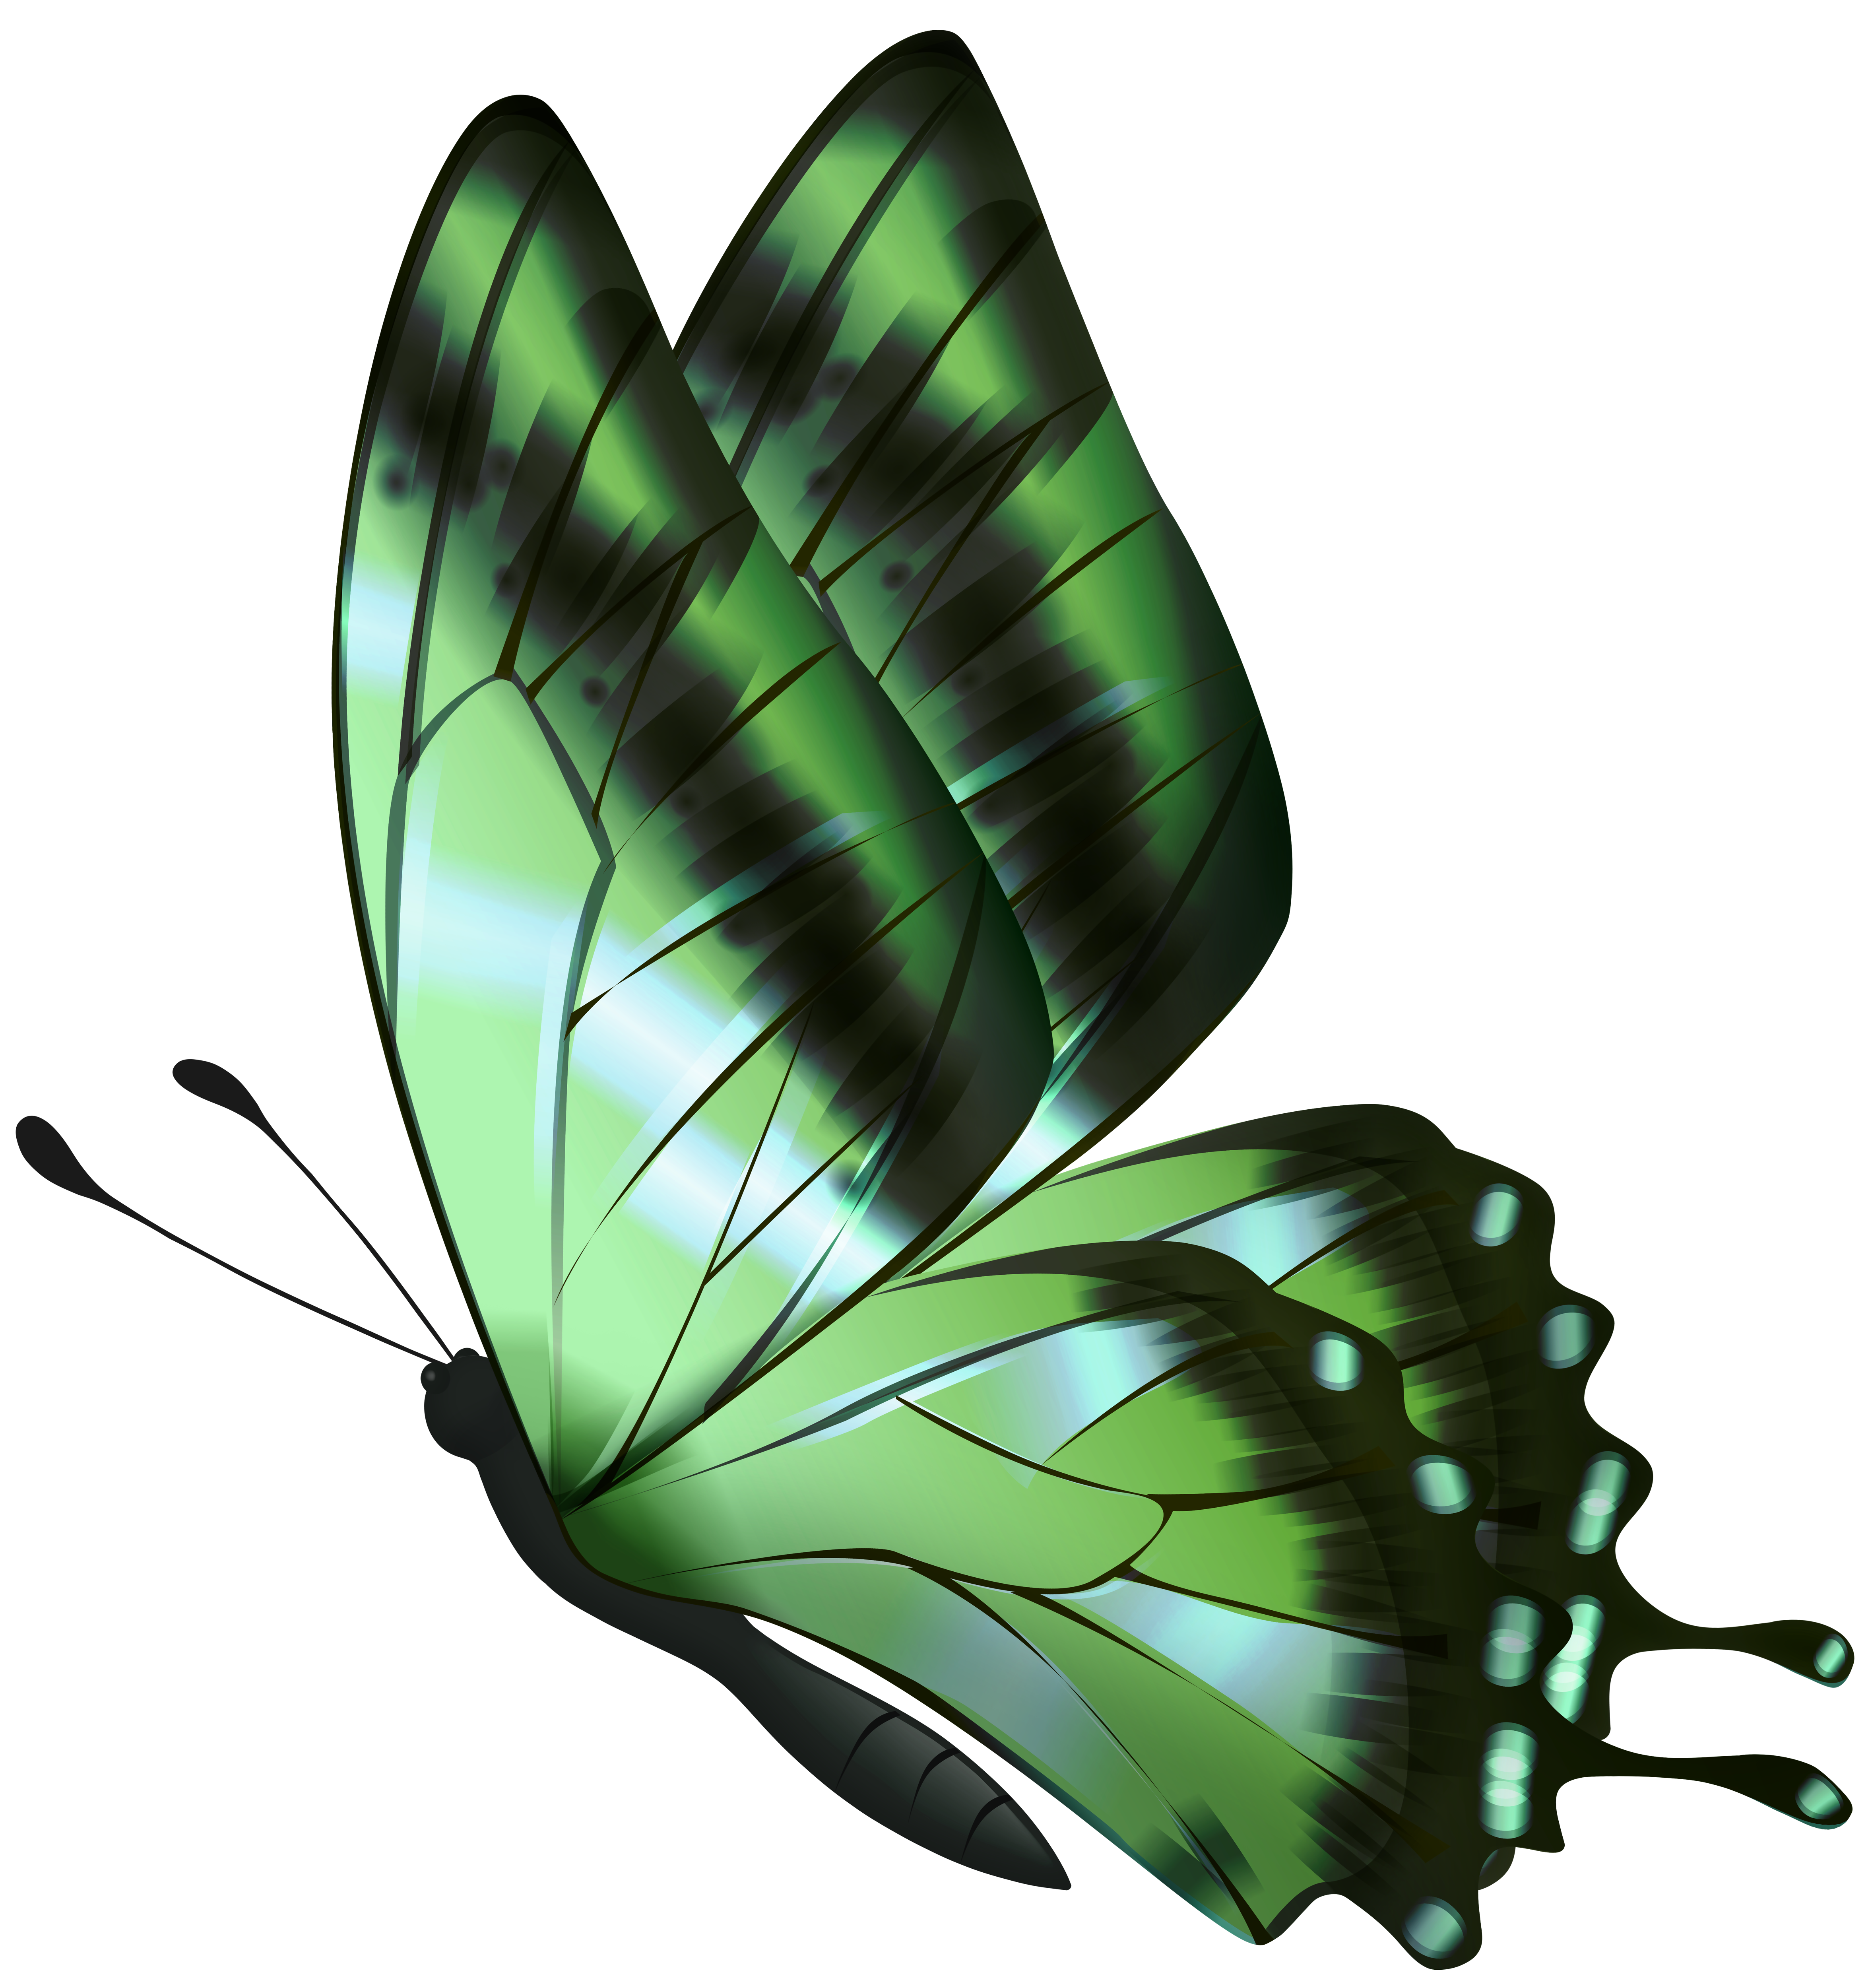 https://gallery.yopriceville.com/var/albums/Free-Clipart-Pictures/Butterflies-PNG/Green_Flying_Butterfly_PNG_Clipart.png?m=1663922933